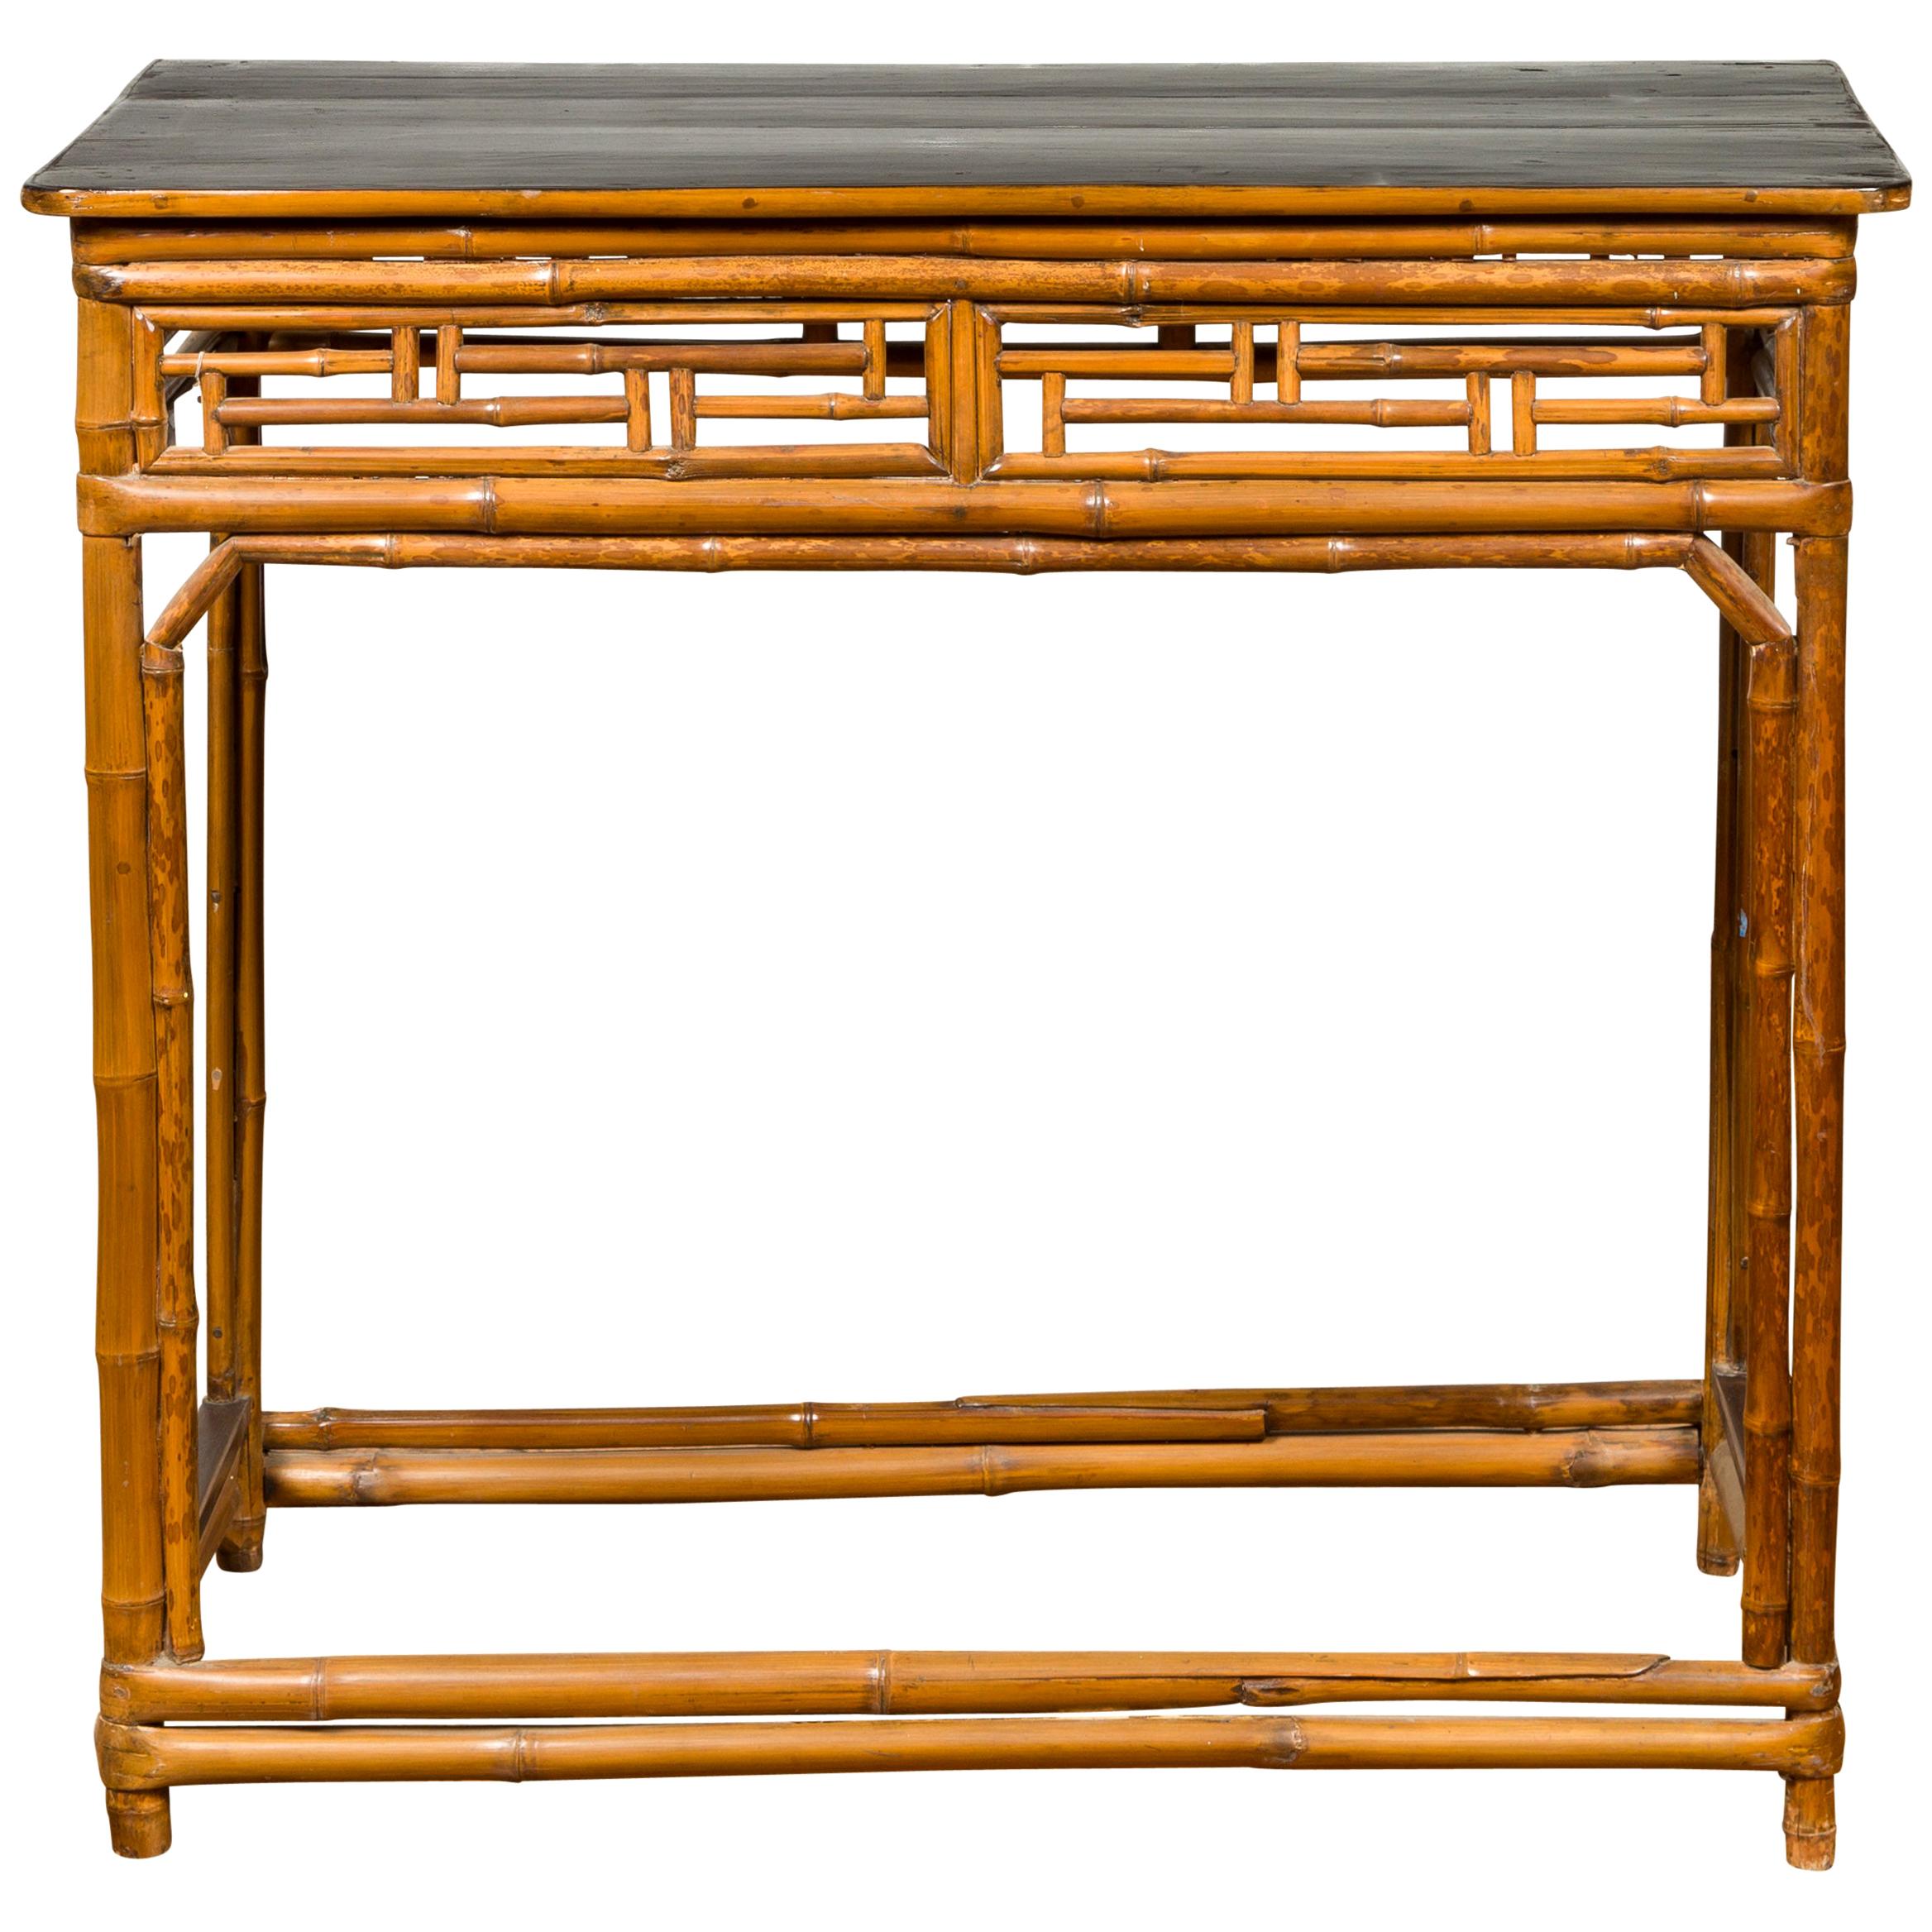 Chinese Qing Dynasty Bamboo Altar Console Table with Geometric Patterns